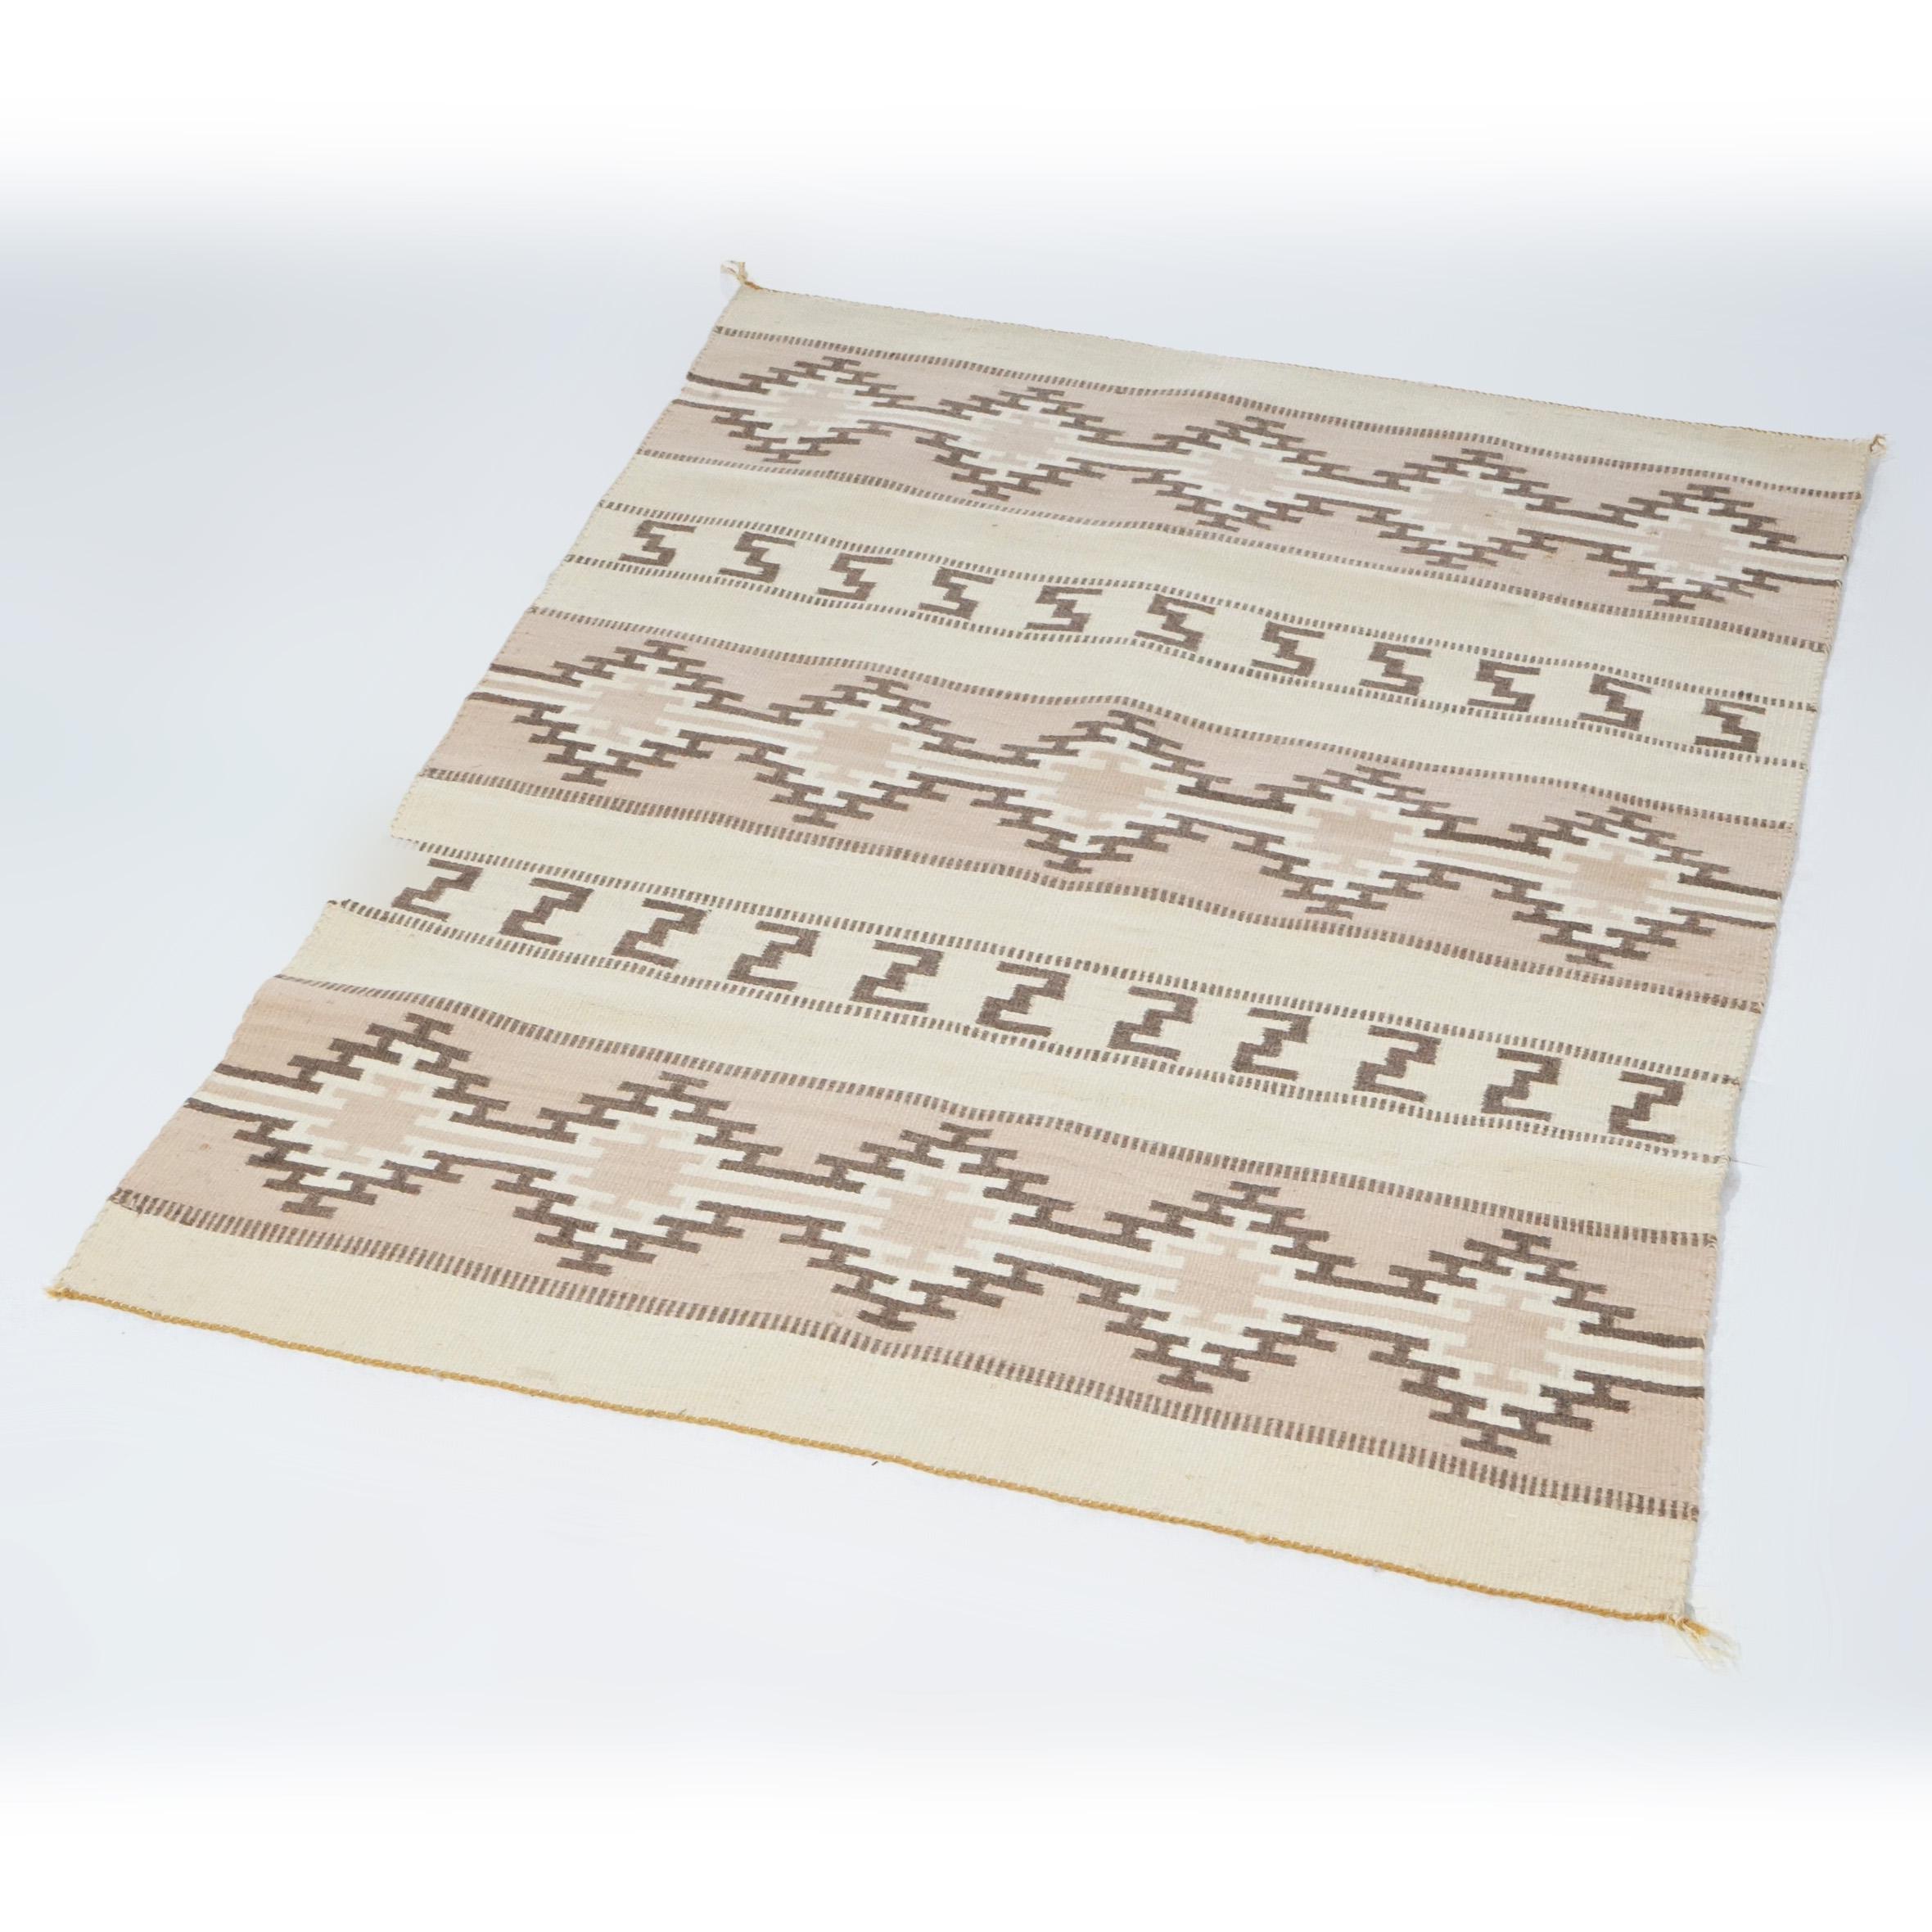 A southwestern American Indian Navajo style rug offers wool construction with stripes having repeating geometric design, 20th Century. 

Measures - 45 1/2